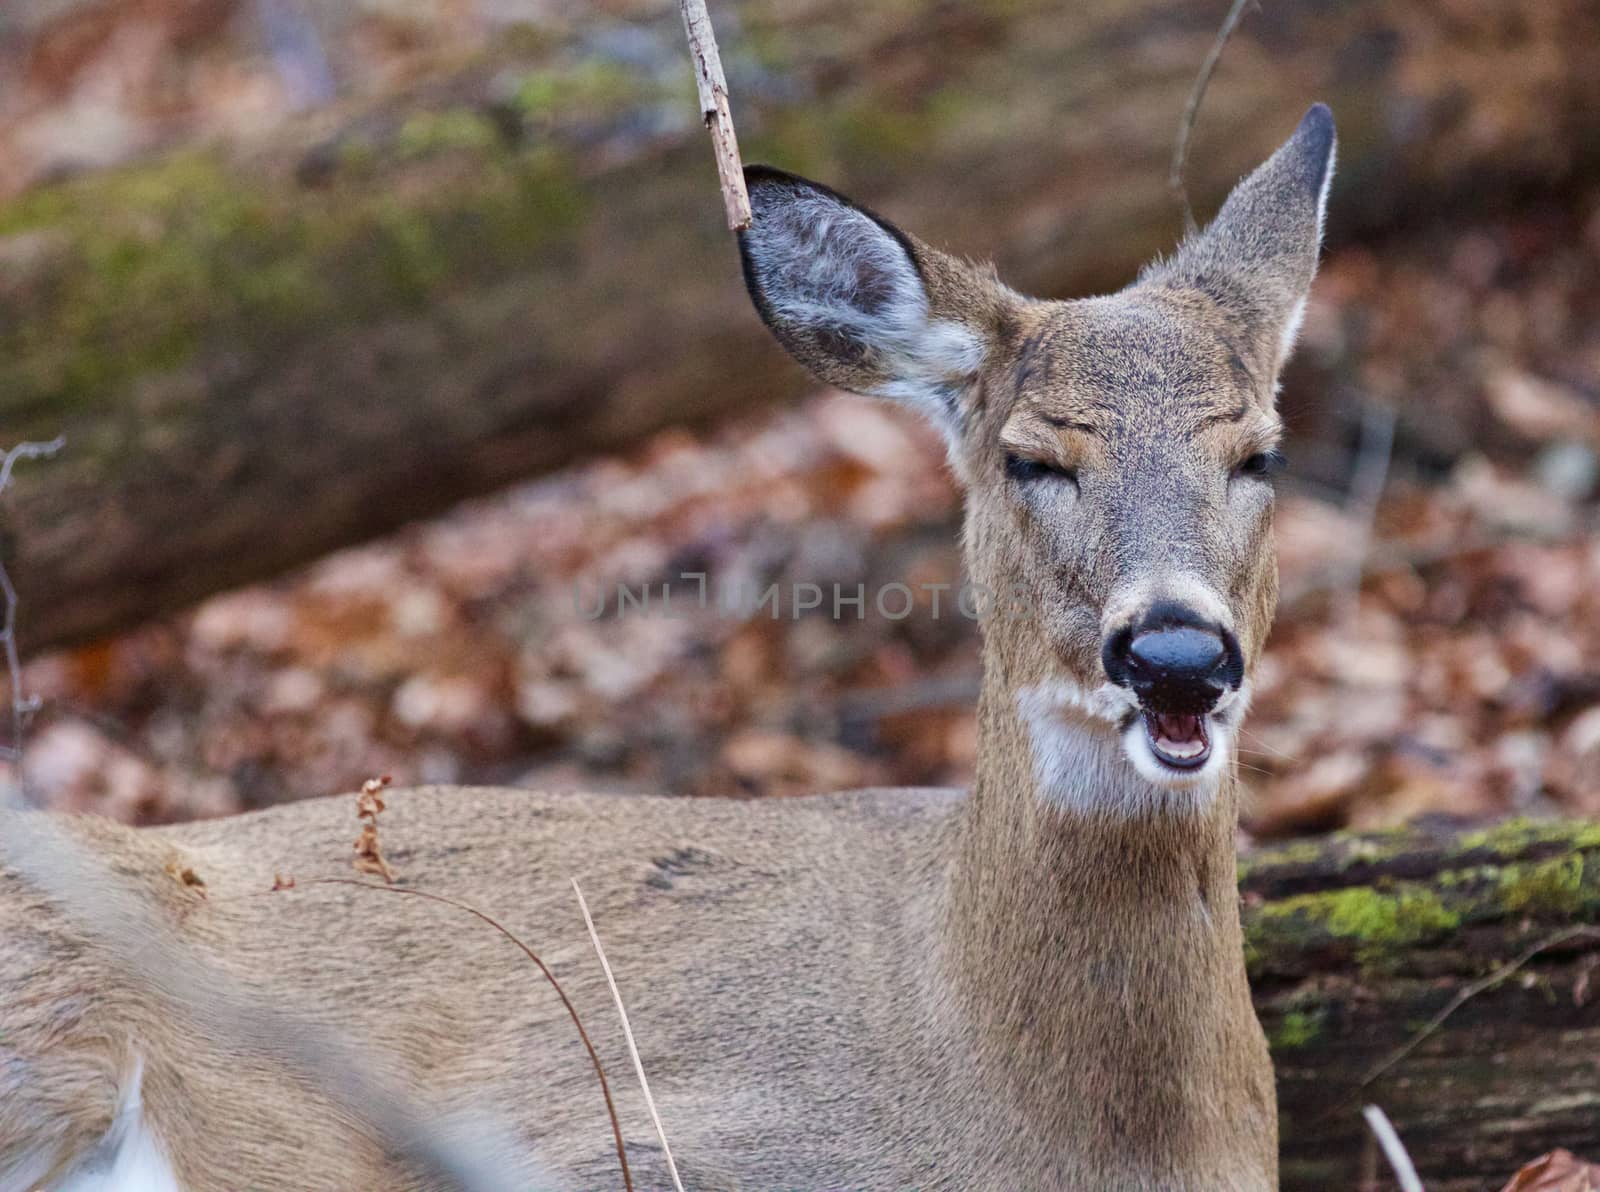 Funny close-up of a deer in the forest